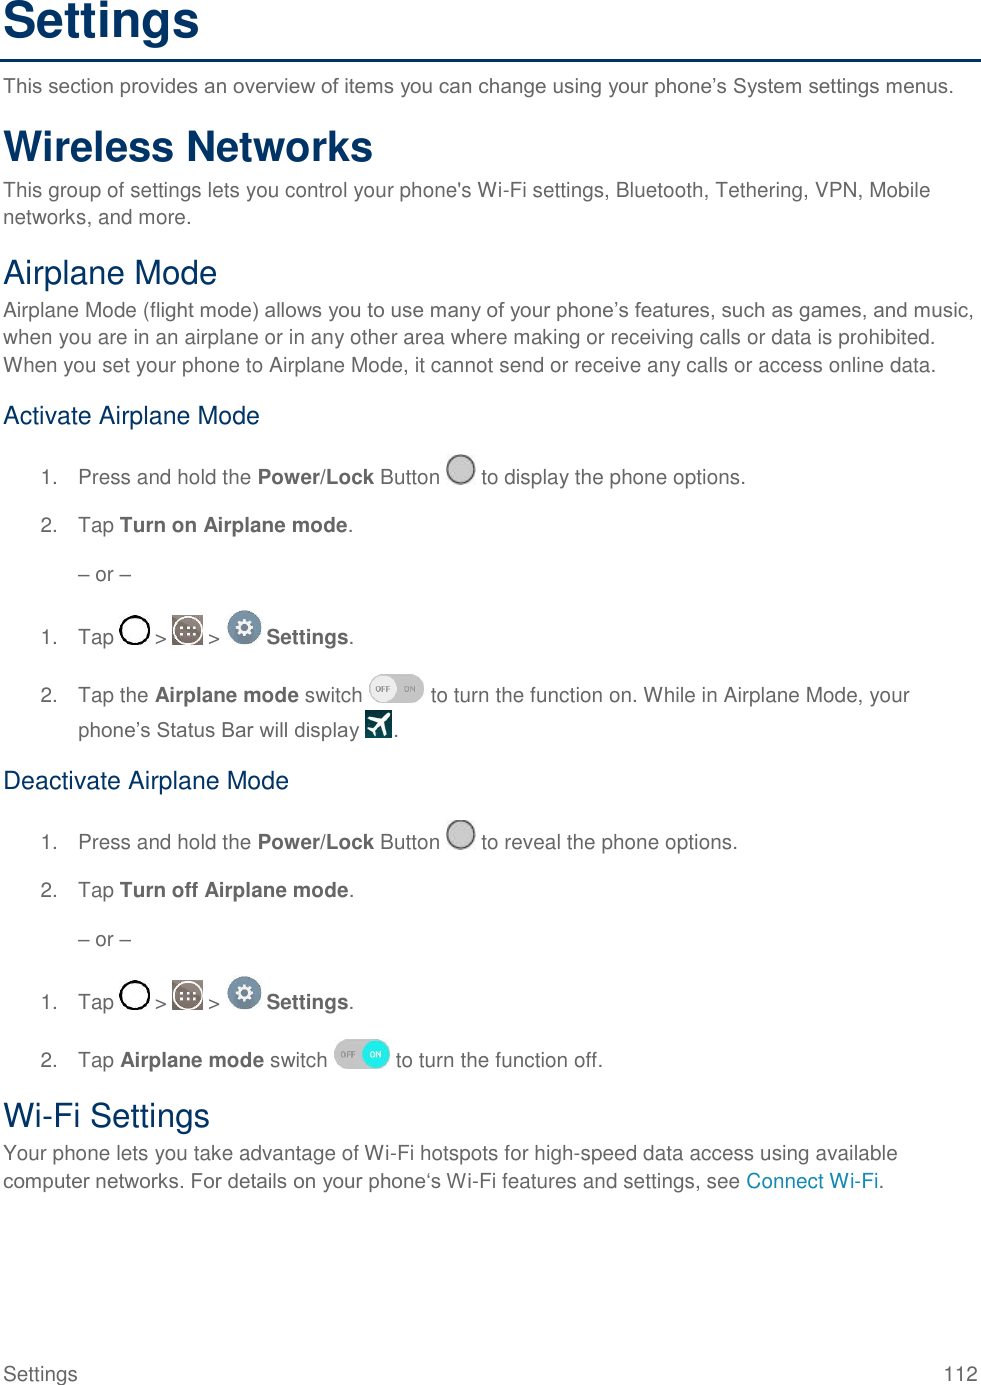 Settings  112 Settings This section provides an overview of items you can change using your phone‘s System settings menus. Wireless Networks This group of settings lets you control your phone&apos;s Wi-Fi settings, Bluetooth, Tethering, VPN, Mobile networks, and more. Airplane Mode Airplane Mode (flight mode) allows you to use many of your phone‘s features, such as games, and music, when you are in an airplane or in any other area where making or receiving calls or data is prohibited. When you set your phone to Airplane Mode, it cannot send or receive any calls or access online data. Activate Airplane Mode 1.  Press and hold the Power/Lock Button   to display the phone options. 2.  Tap Turn on Airplane mode. – or – 1.  Tap   &gt;   &gt;   Settings. 2.  Tap the Airplane mode switch   to turn the function on. While in Airplane Mode, your phone‘s Status Bar will display  . Deactivate Airplane Mode 1.  Press and hold the Power/Lock Button   to reveal the phone options. 2.  Tap Turn off Airplane mode. – or – 1.  Tap   &gt;   &gt;   Settings. 2.  Tap Airplane mode switch   to turn the function off. Wi-Fi Settings Your phone lets you take advantage of Wi-Fi hotspots for high-speed data access using available computer networks. For details on your phone‗s Wi-Fi features and settings, see Connect Wi-Fi. 